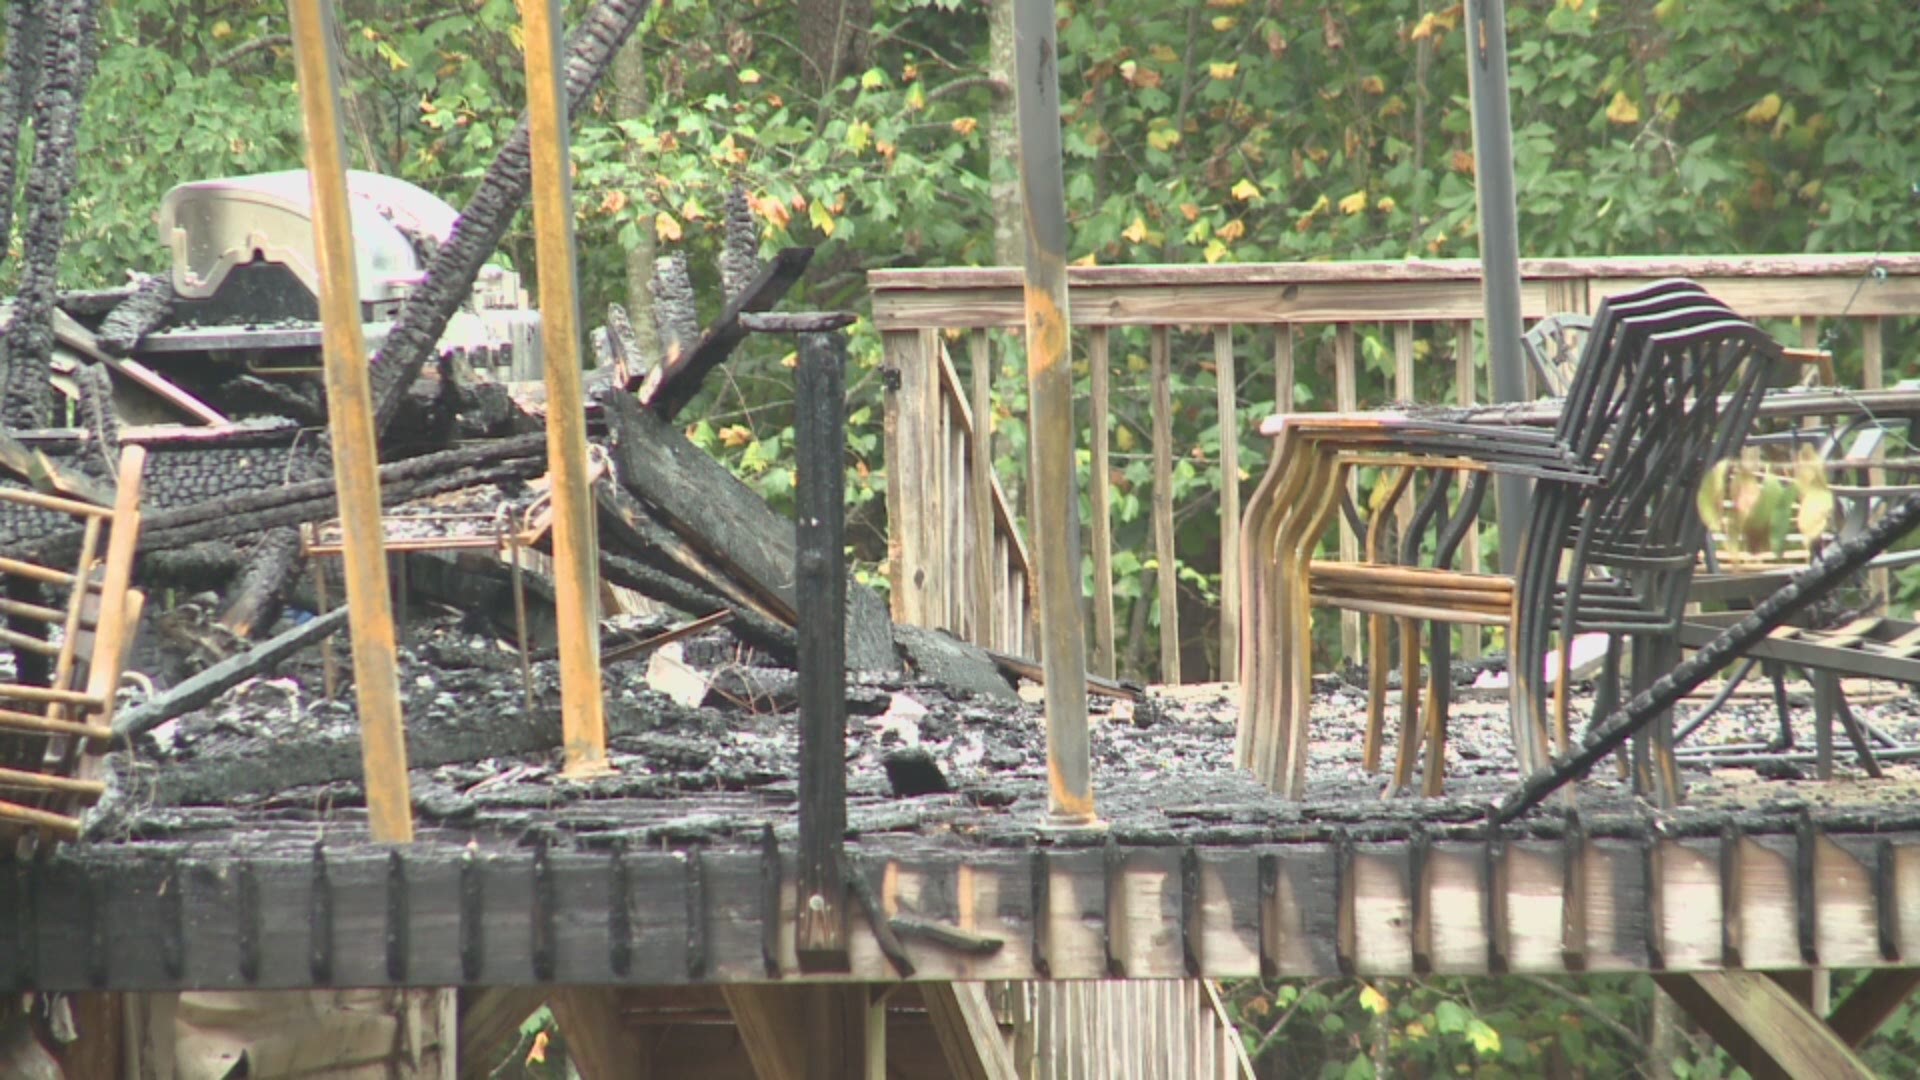 Deputies attempted to rescue the children from the fully engulfed house but were not successful.